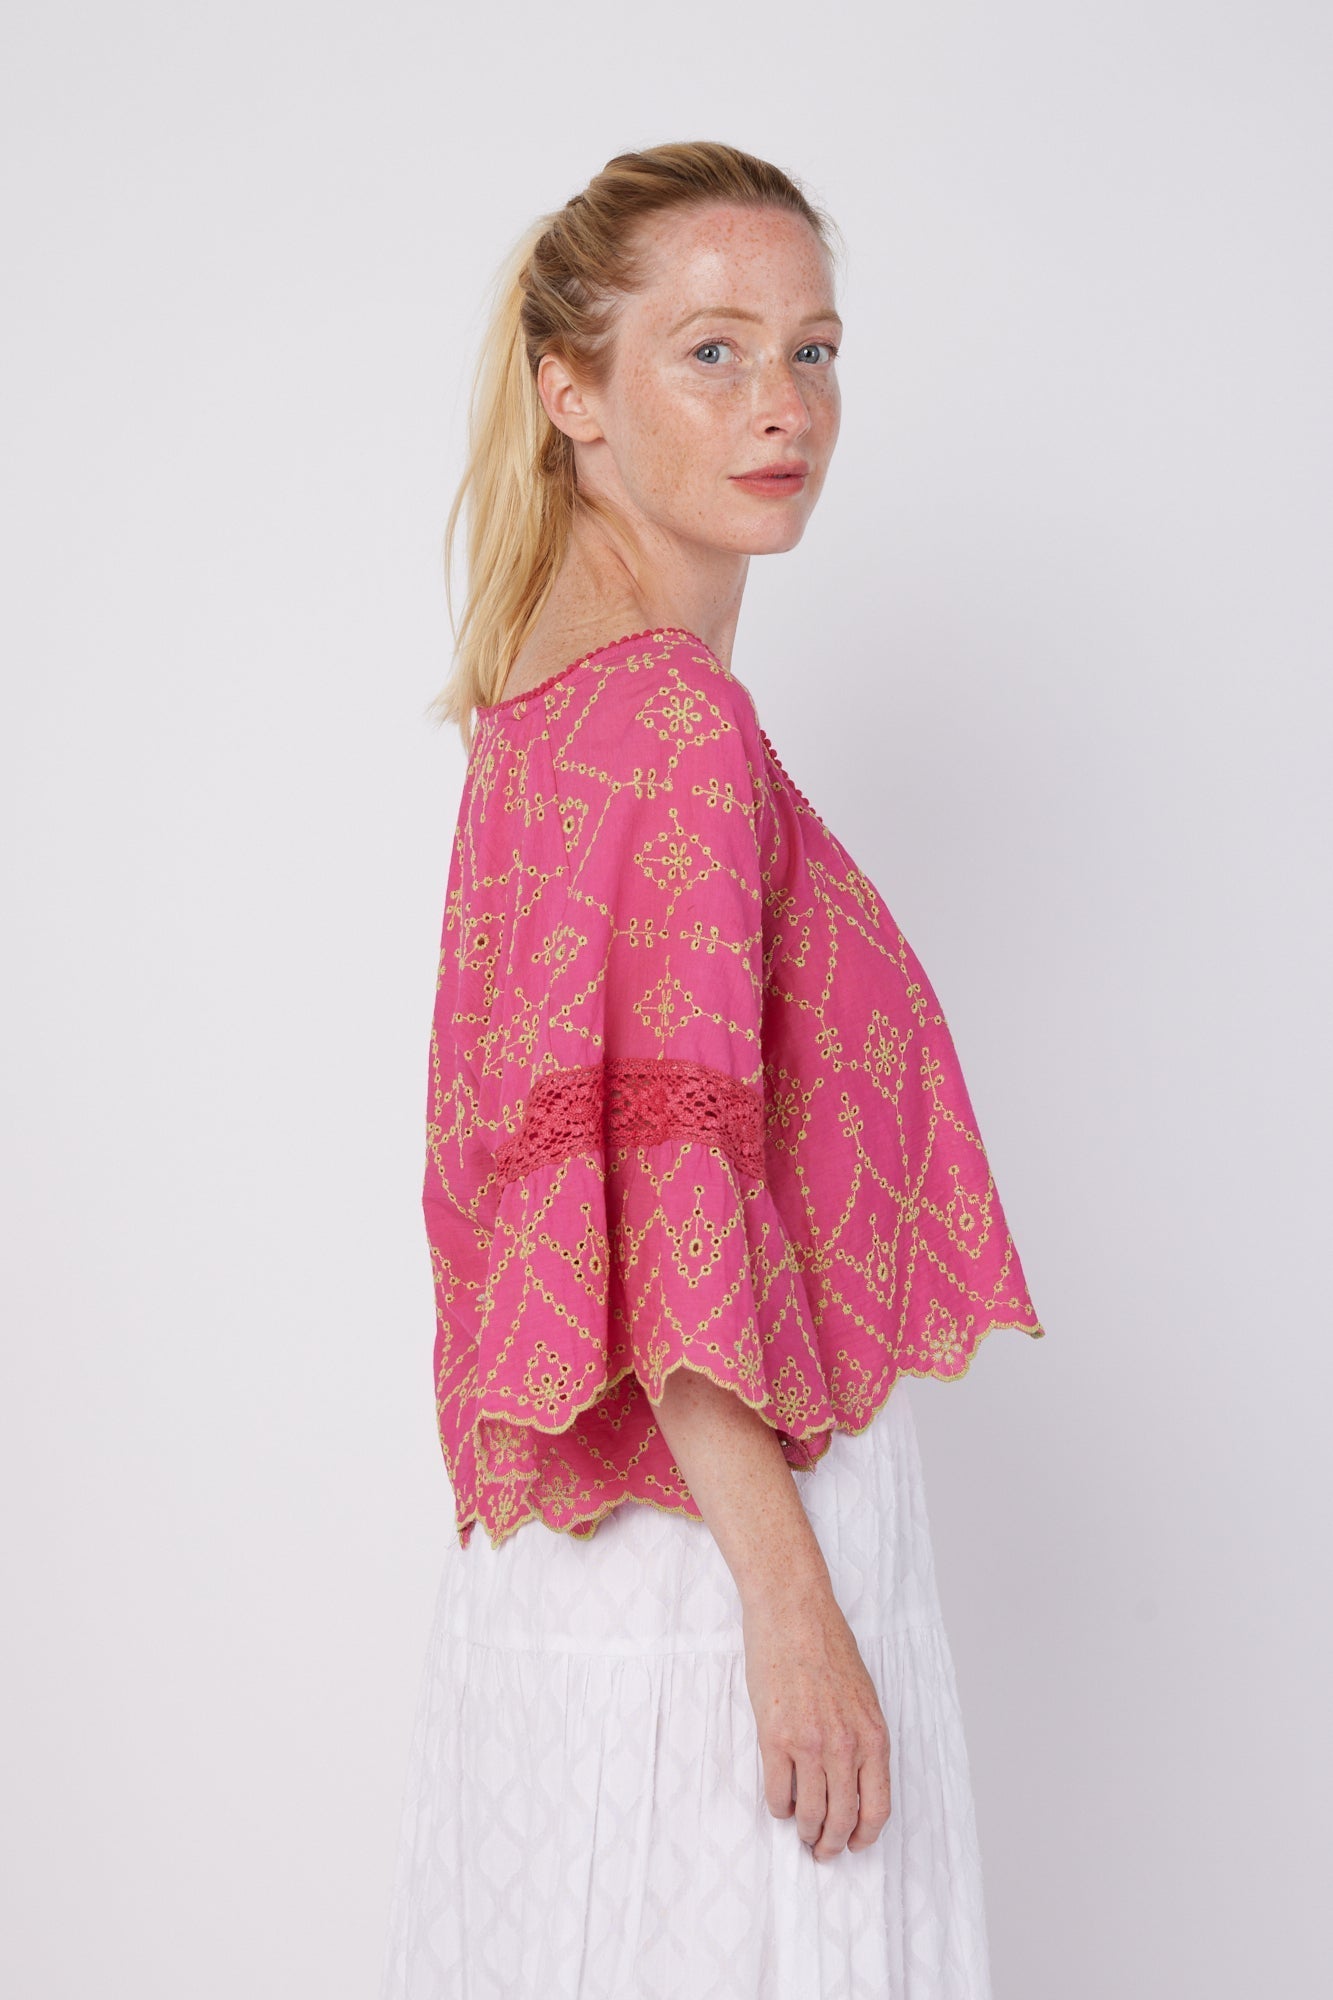 ModaPosa Vanna Short Bell Sleeve Hand Embroidered Eyelet Blouse in Sorbet . Discover women's resort dresses and lifestyle clothing inspired by the Mediterranean. Free worldwide shipping available!